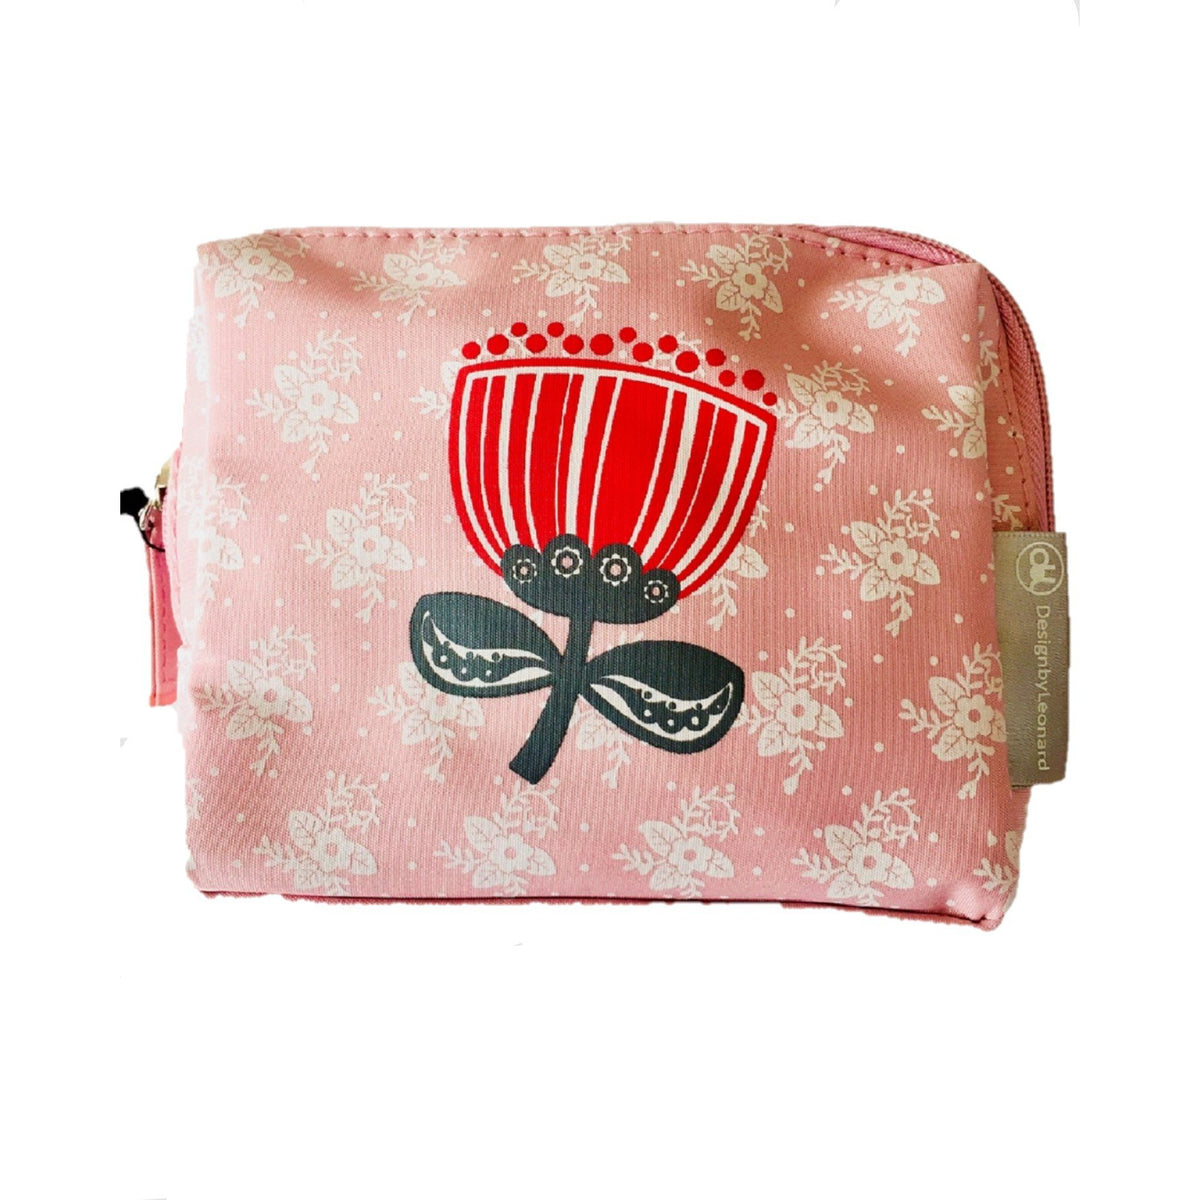 Cosmetic Purse - perfectly sized to carry anti-nausea supplies!